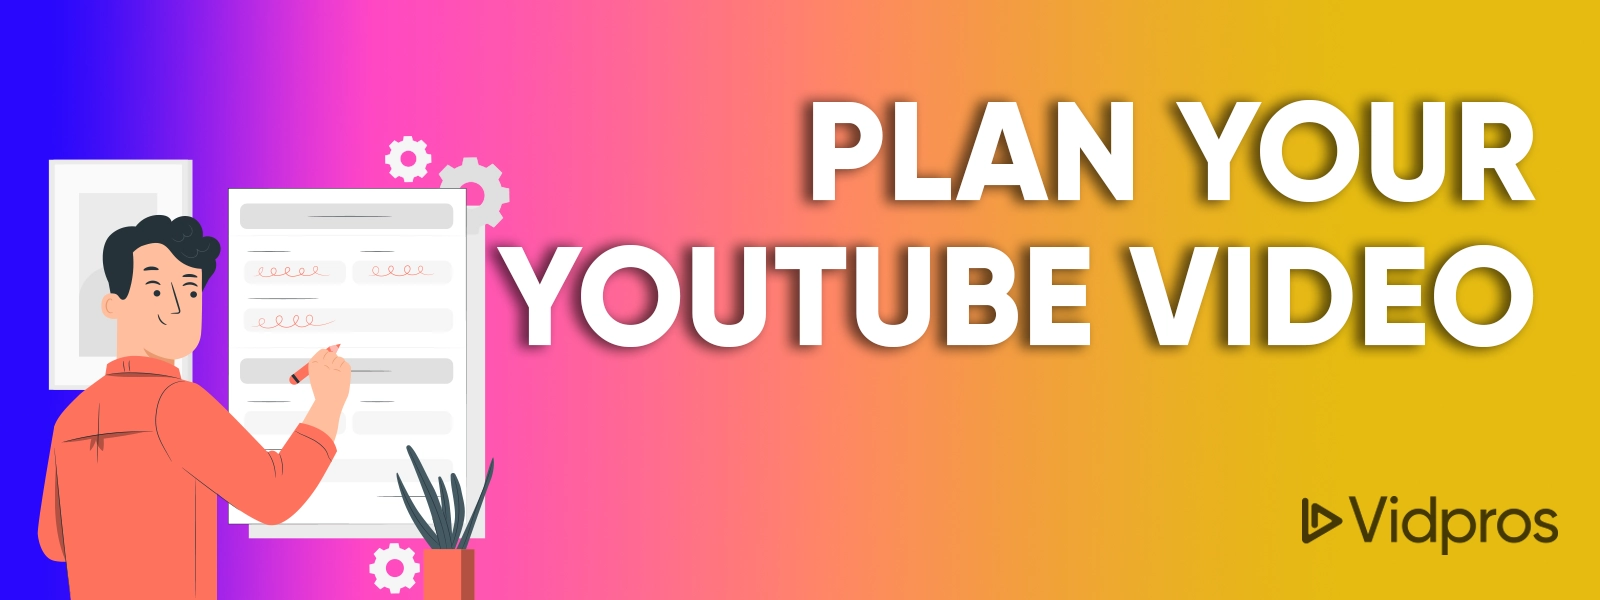 Plan Your YouTube Video